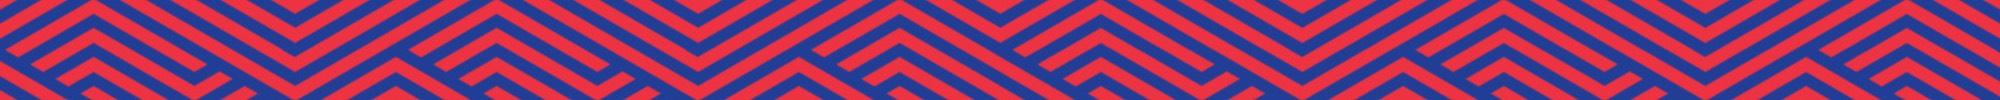 Red and blue weave pattern